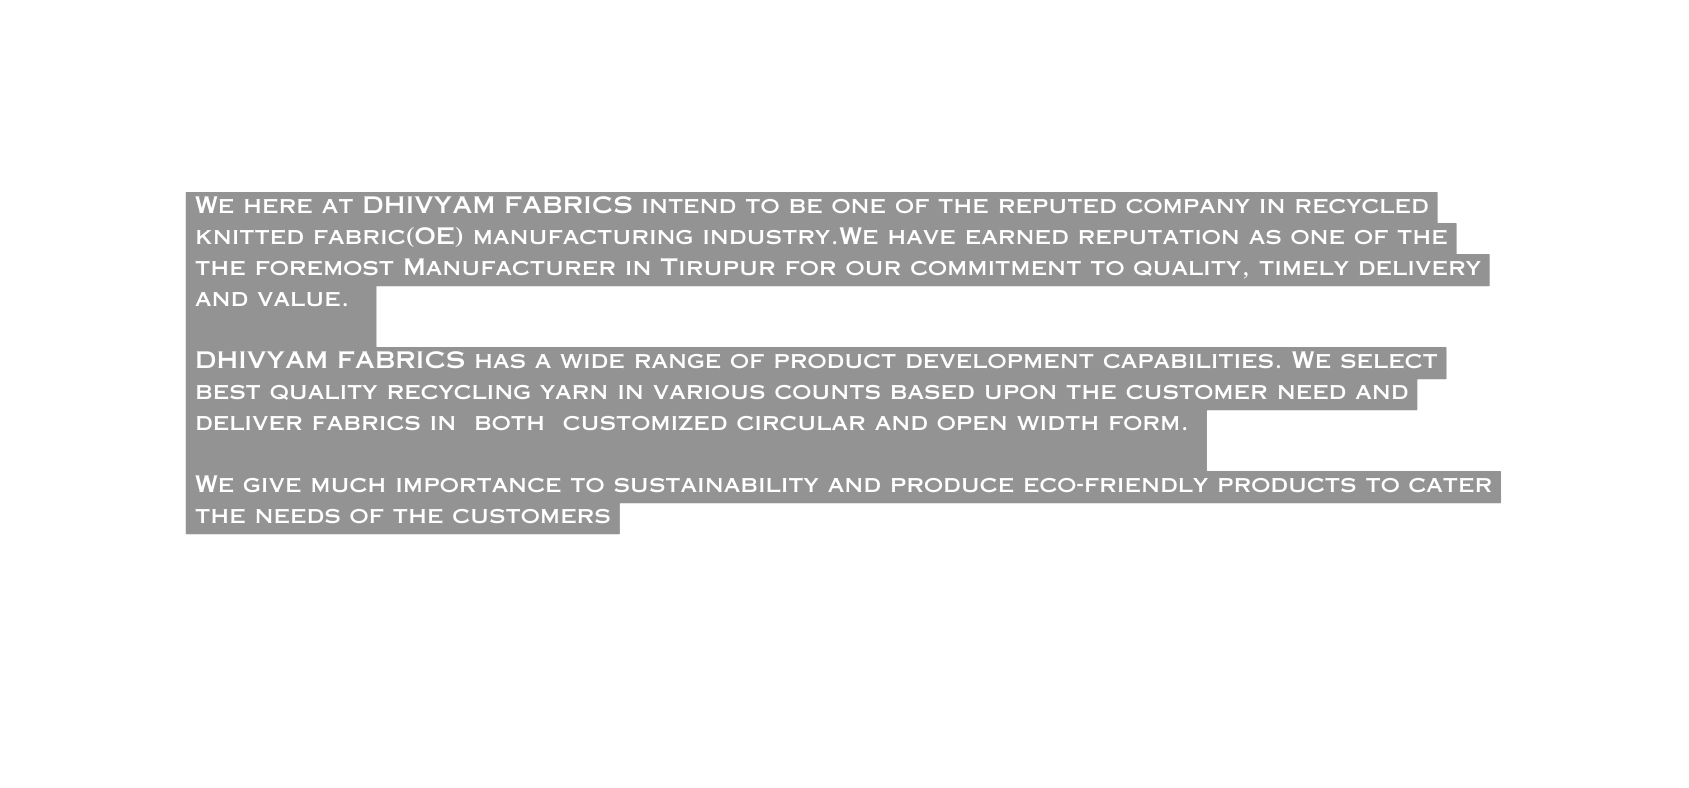 We here at DHIVYAM FABRICS intend to be one of the reputed company in recycled knitted fabric OE manufacturing industry We have earned reputation as one of the the foremost Manufacturer in Tirupur for our commitment to quality timely delivery and value DHIVYAM FABRICS has a wide range of product development capabilities We select best quality recycling yarn in various counts based upon the customer need and deliver fabrics in both customized circular and open width form We give much importance to sustainability and produce eco friendly products to cater the needs of the customers